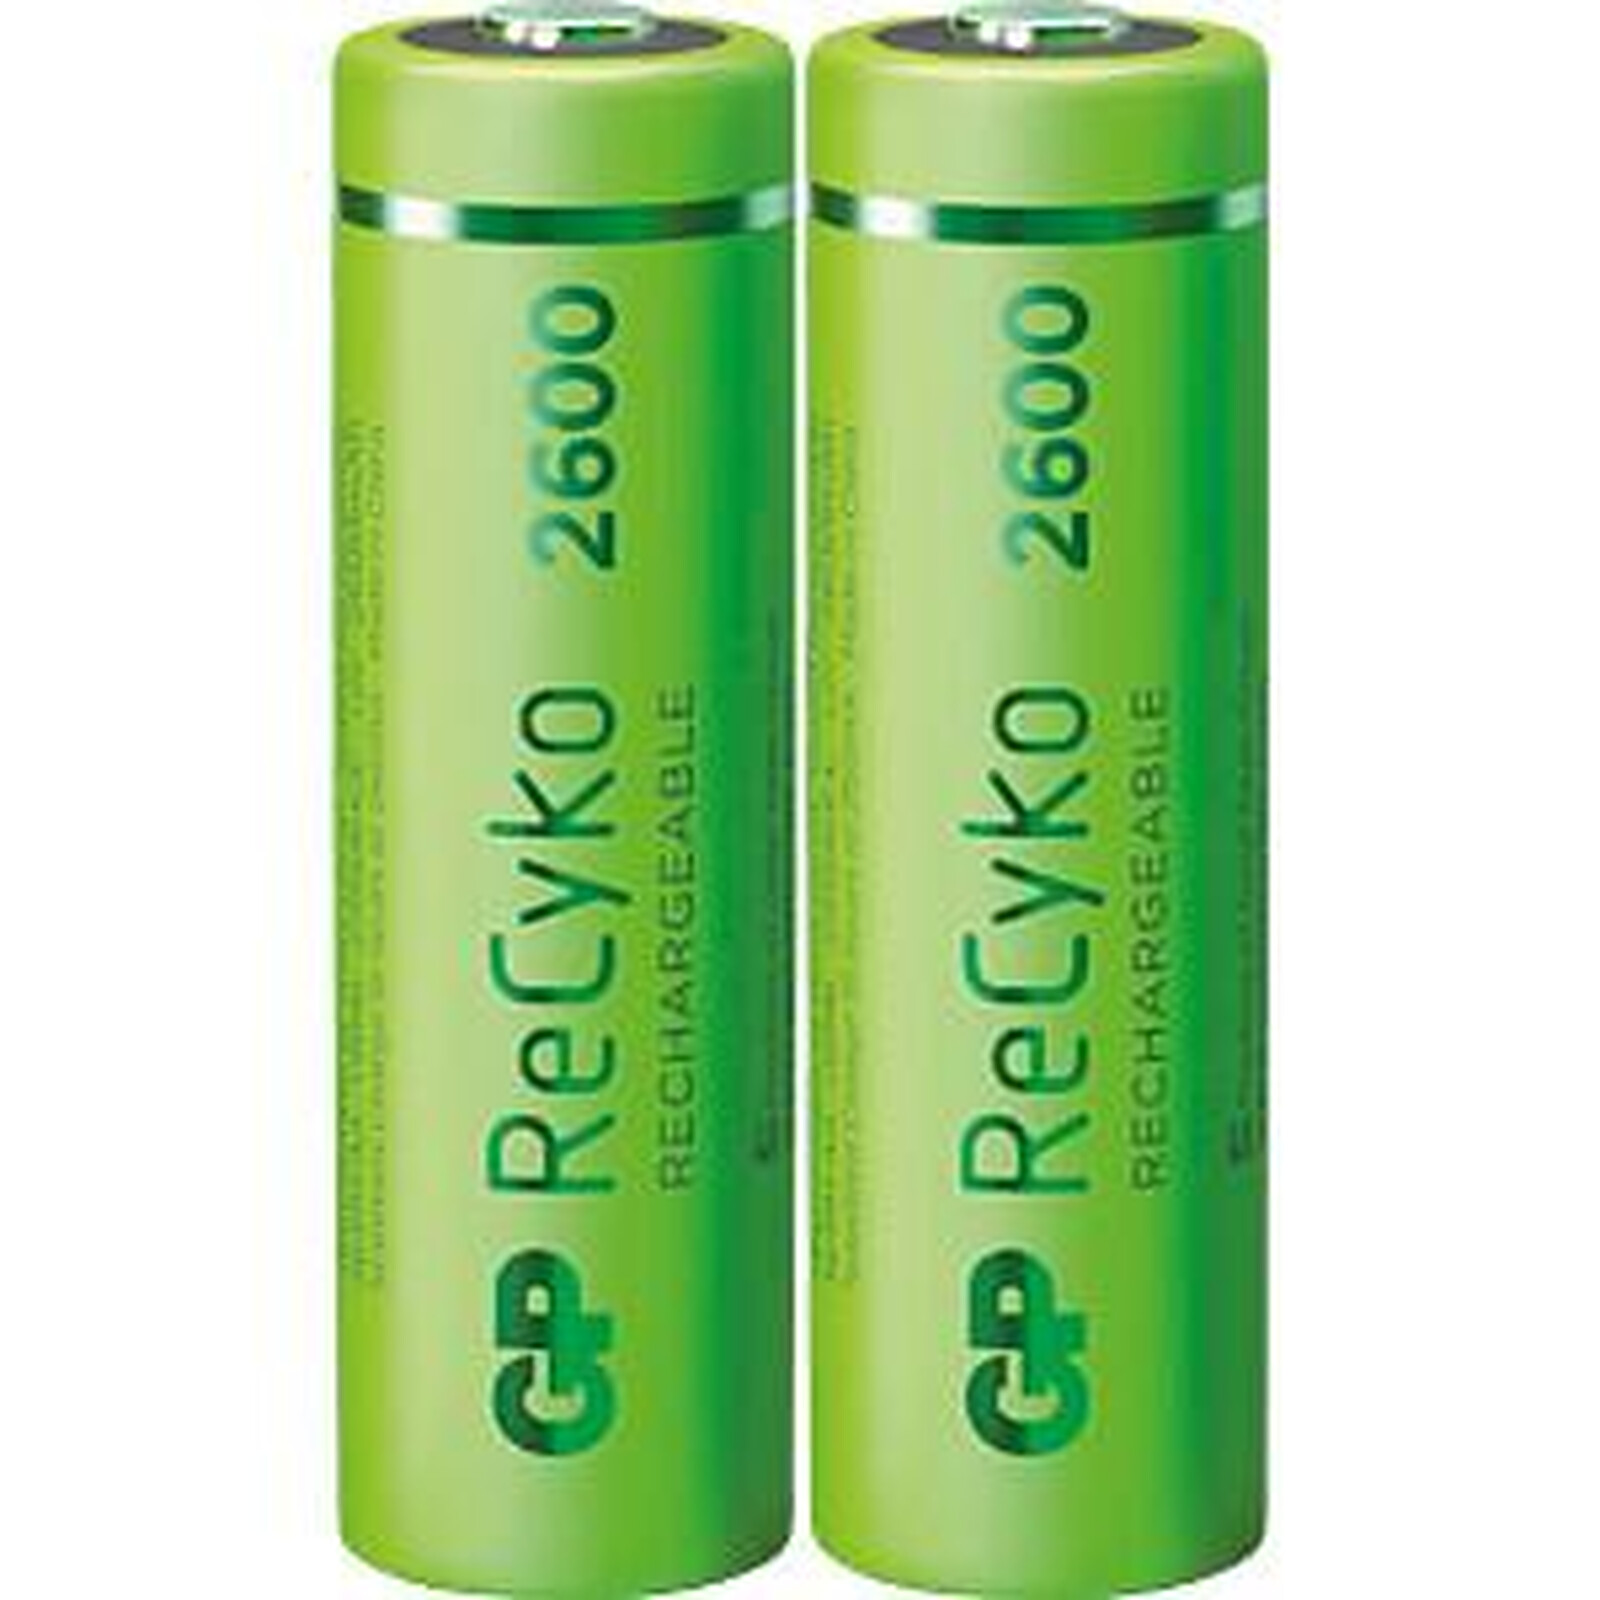 GP Batteries - Pack 2 piles rechargeables AAA ReCyKo 2600mAh - Pile &  chargeur - LDLC